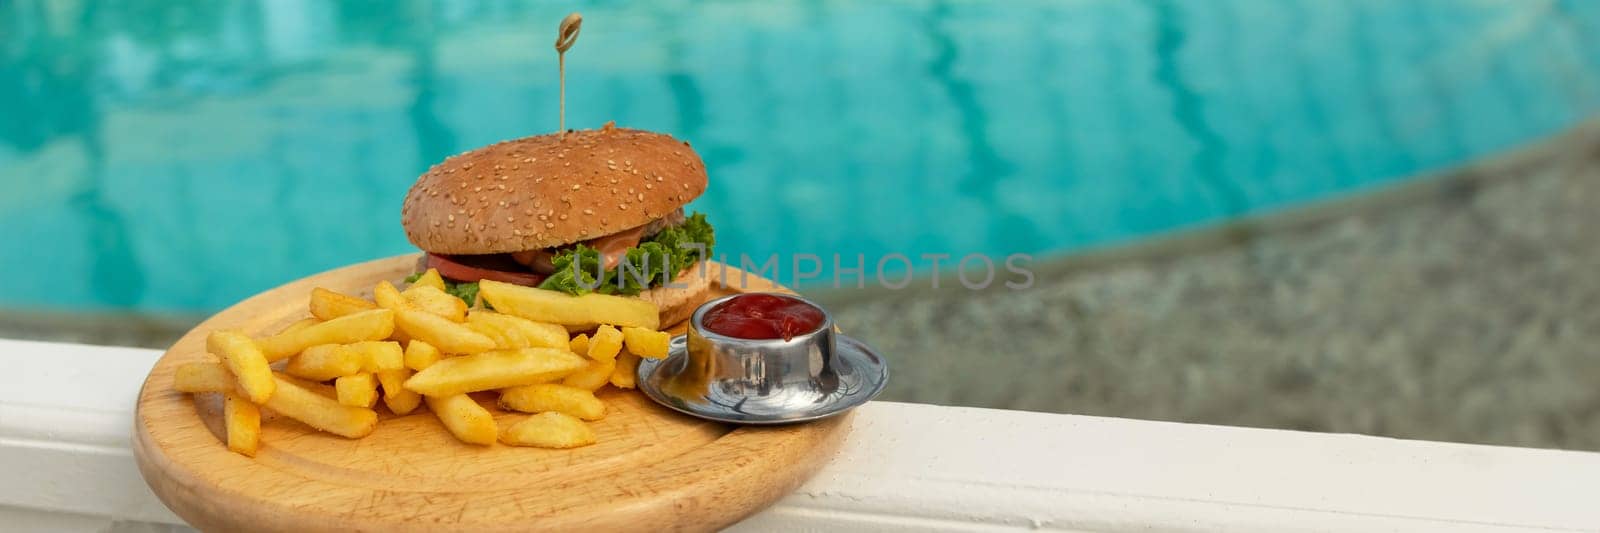 banner of tasty hamburger, appetizing french fries and ketchup. concept of relaxing and eating by the sea on a bright, hot and sunny day on the beach. soft focus by Leoschka